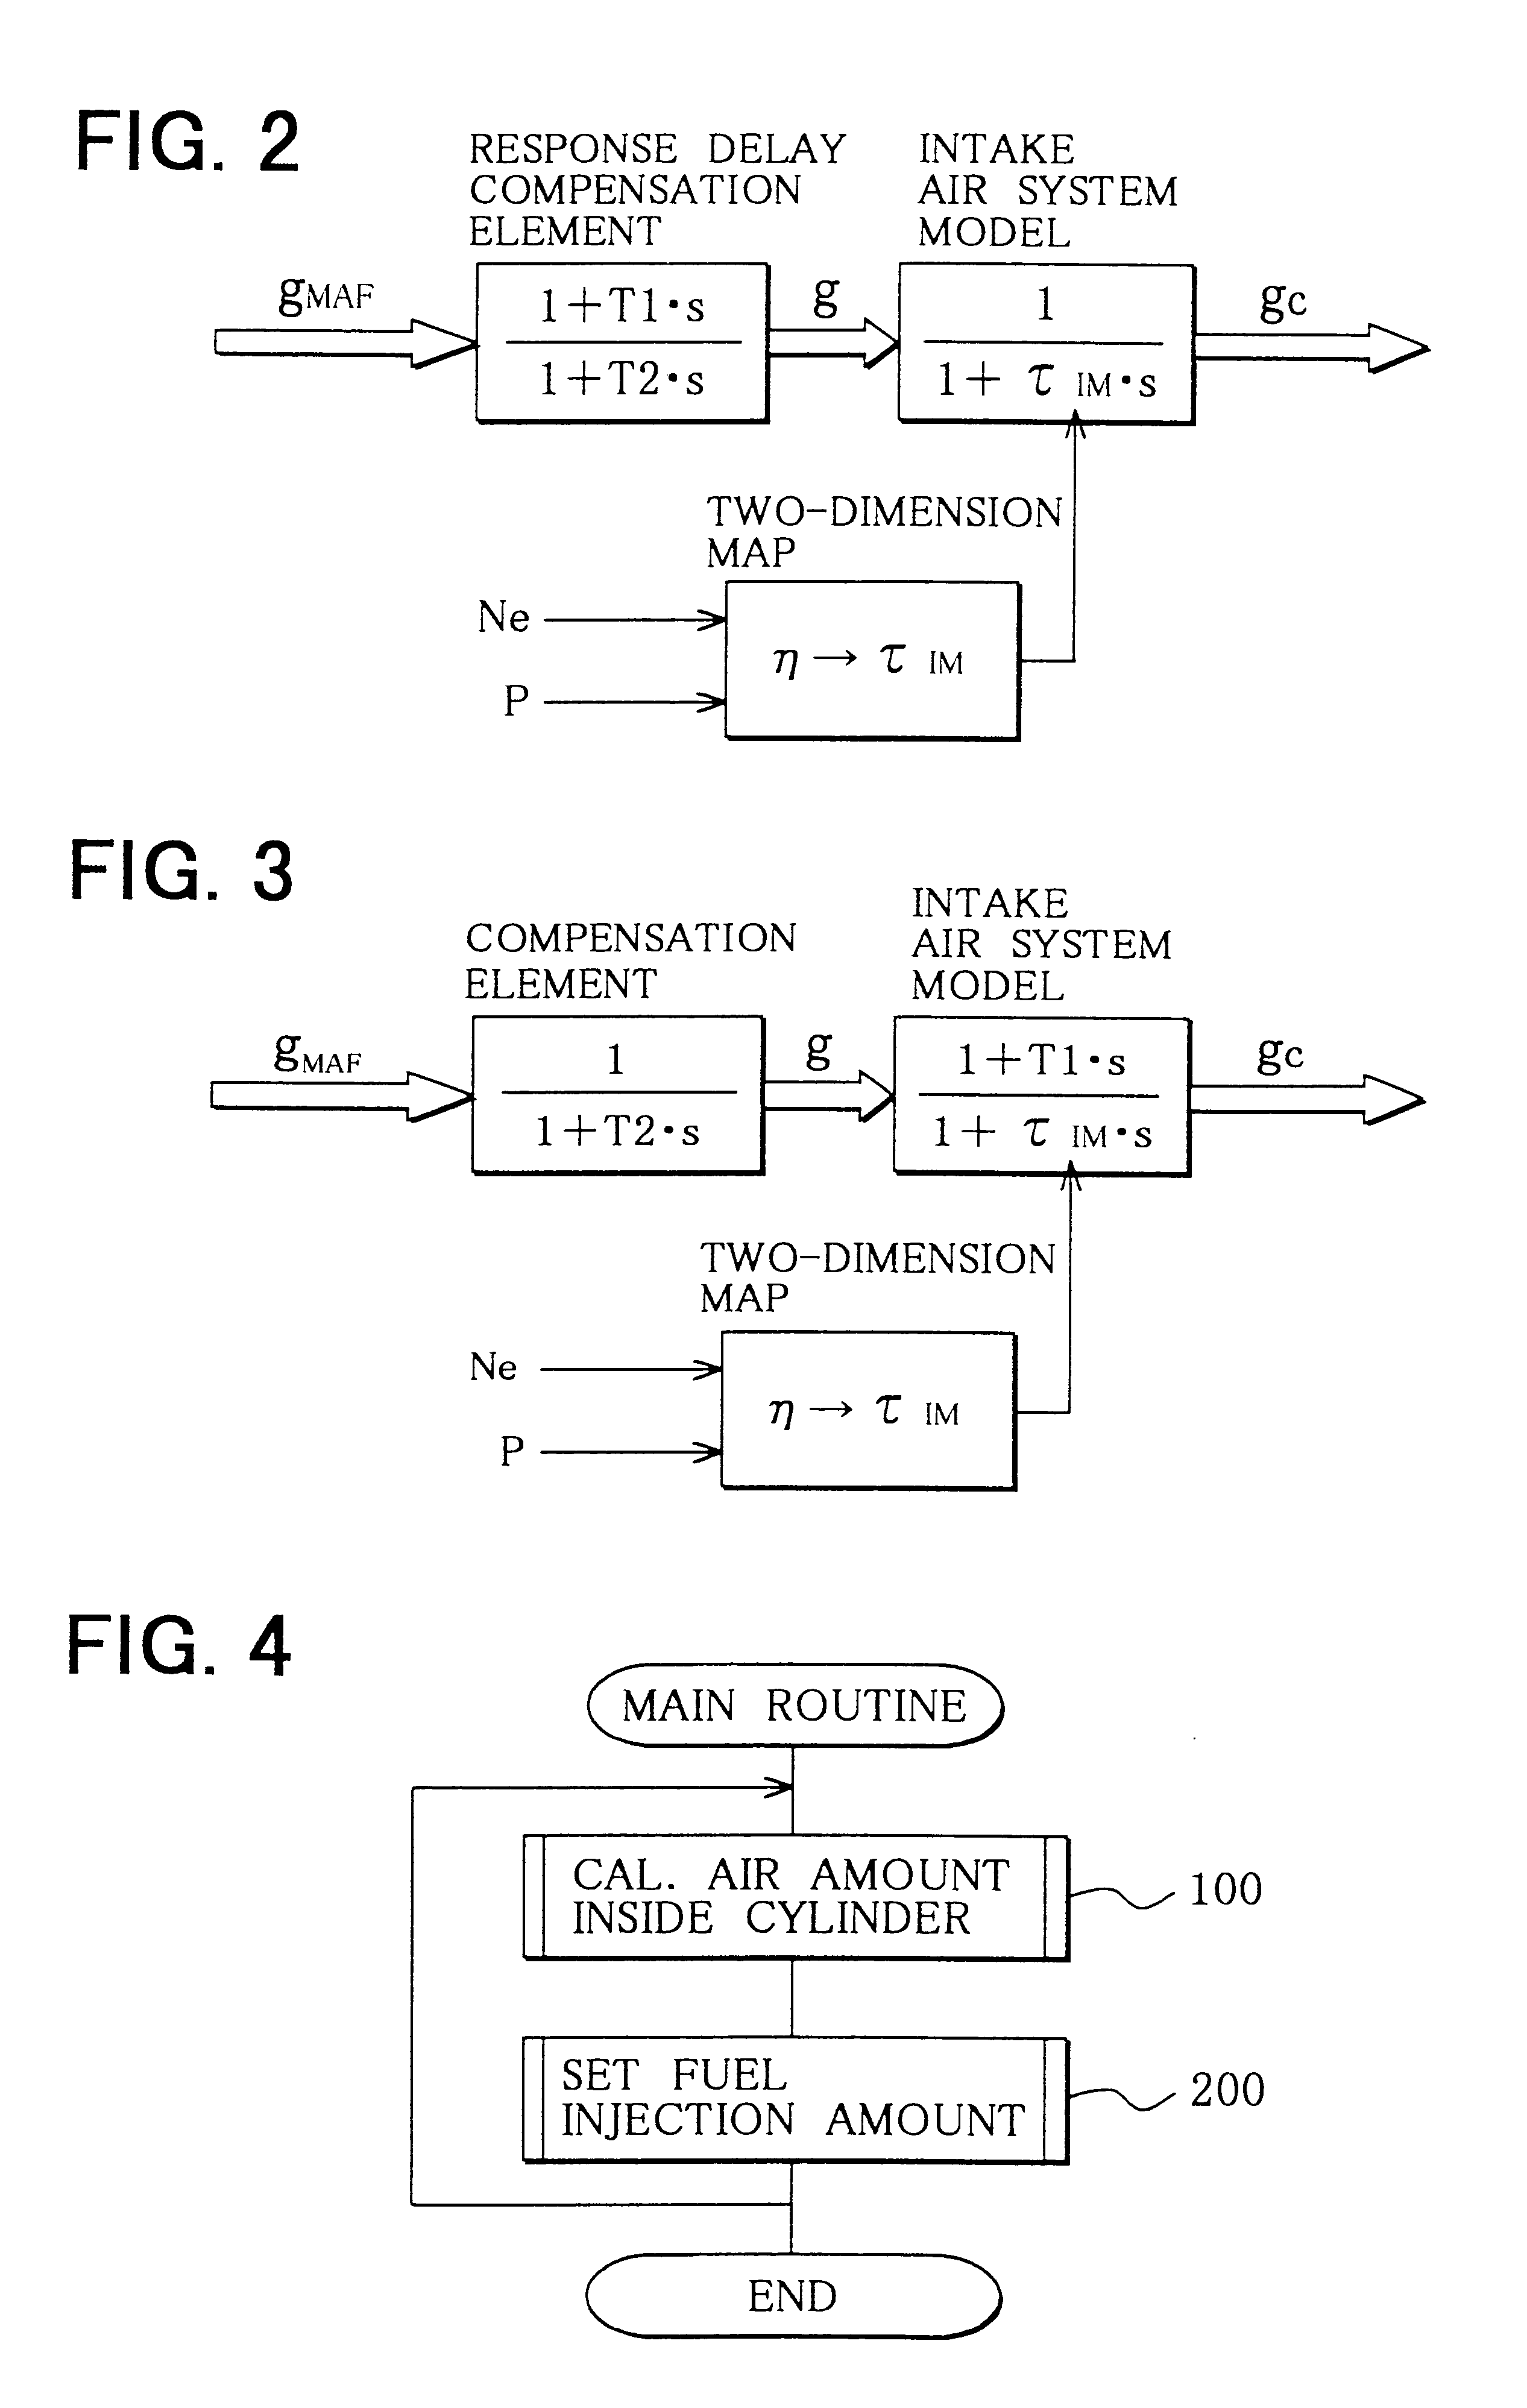 Air amount detector for internal combustion engine